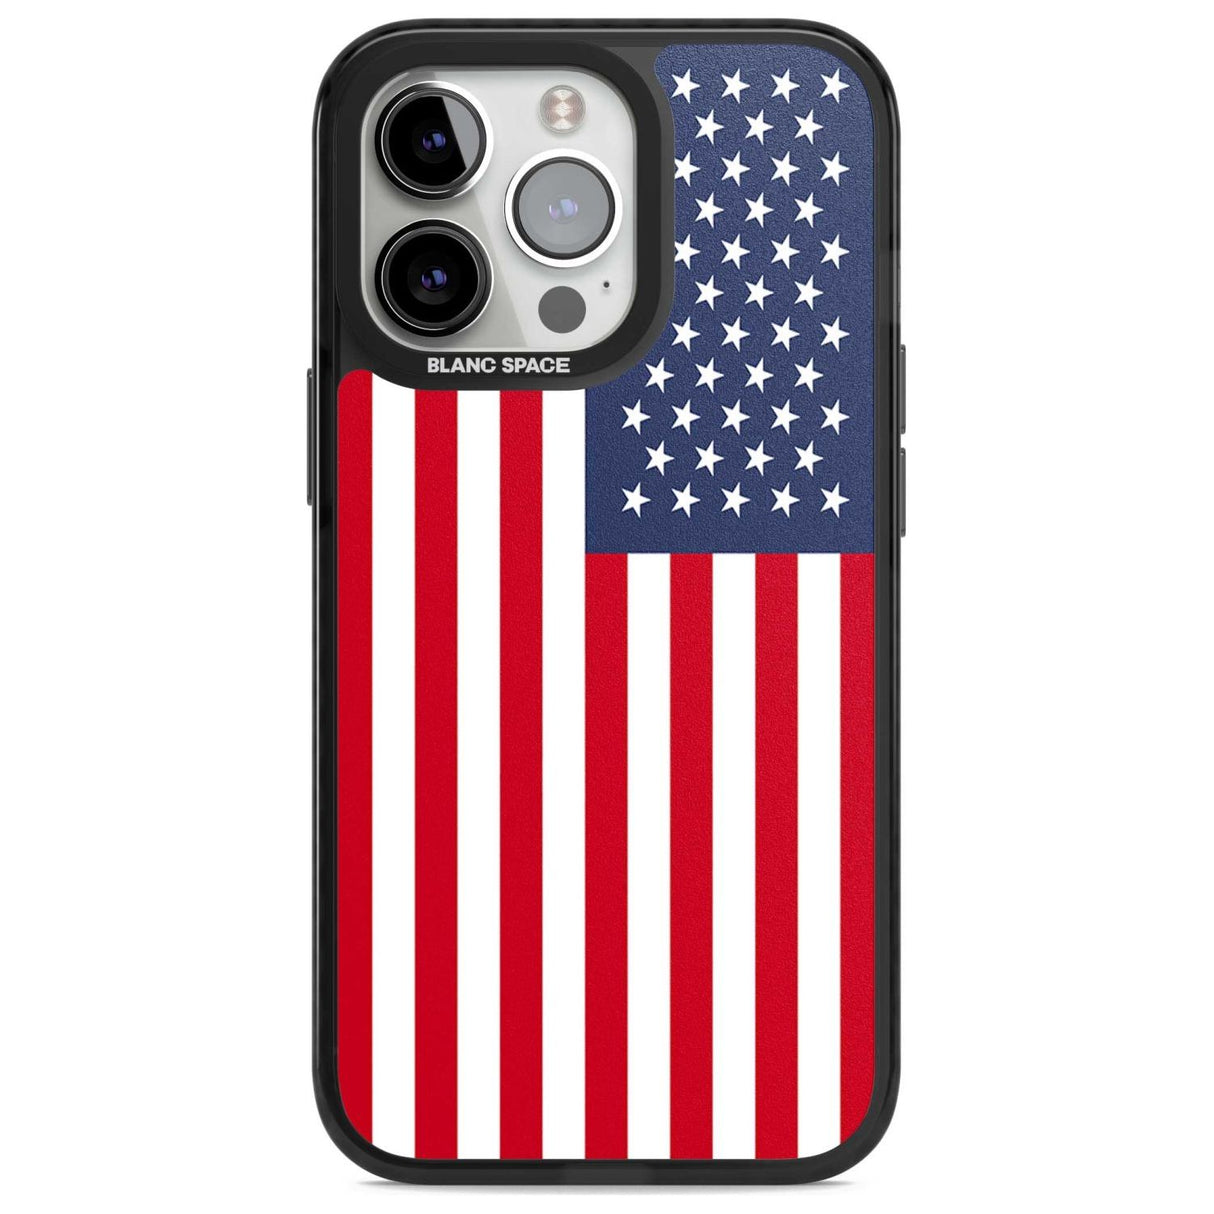 American Flag Phone Case iPhone 15 Pro / Magsafe Black Impact Case,iPhone 15 Pro Max / Magsafe Black Impact Case,iPhone 14 Pro Max / Magsafe Black Impact Case,iPhone 13 Pro / Magsafe Black Impact Case,iPhone 14 Pro / Magsafe Black Impact Case Blanc Space